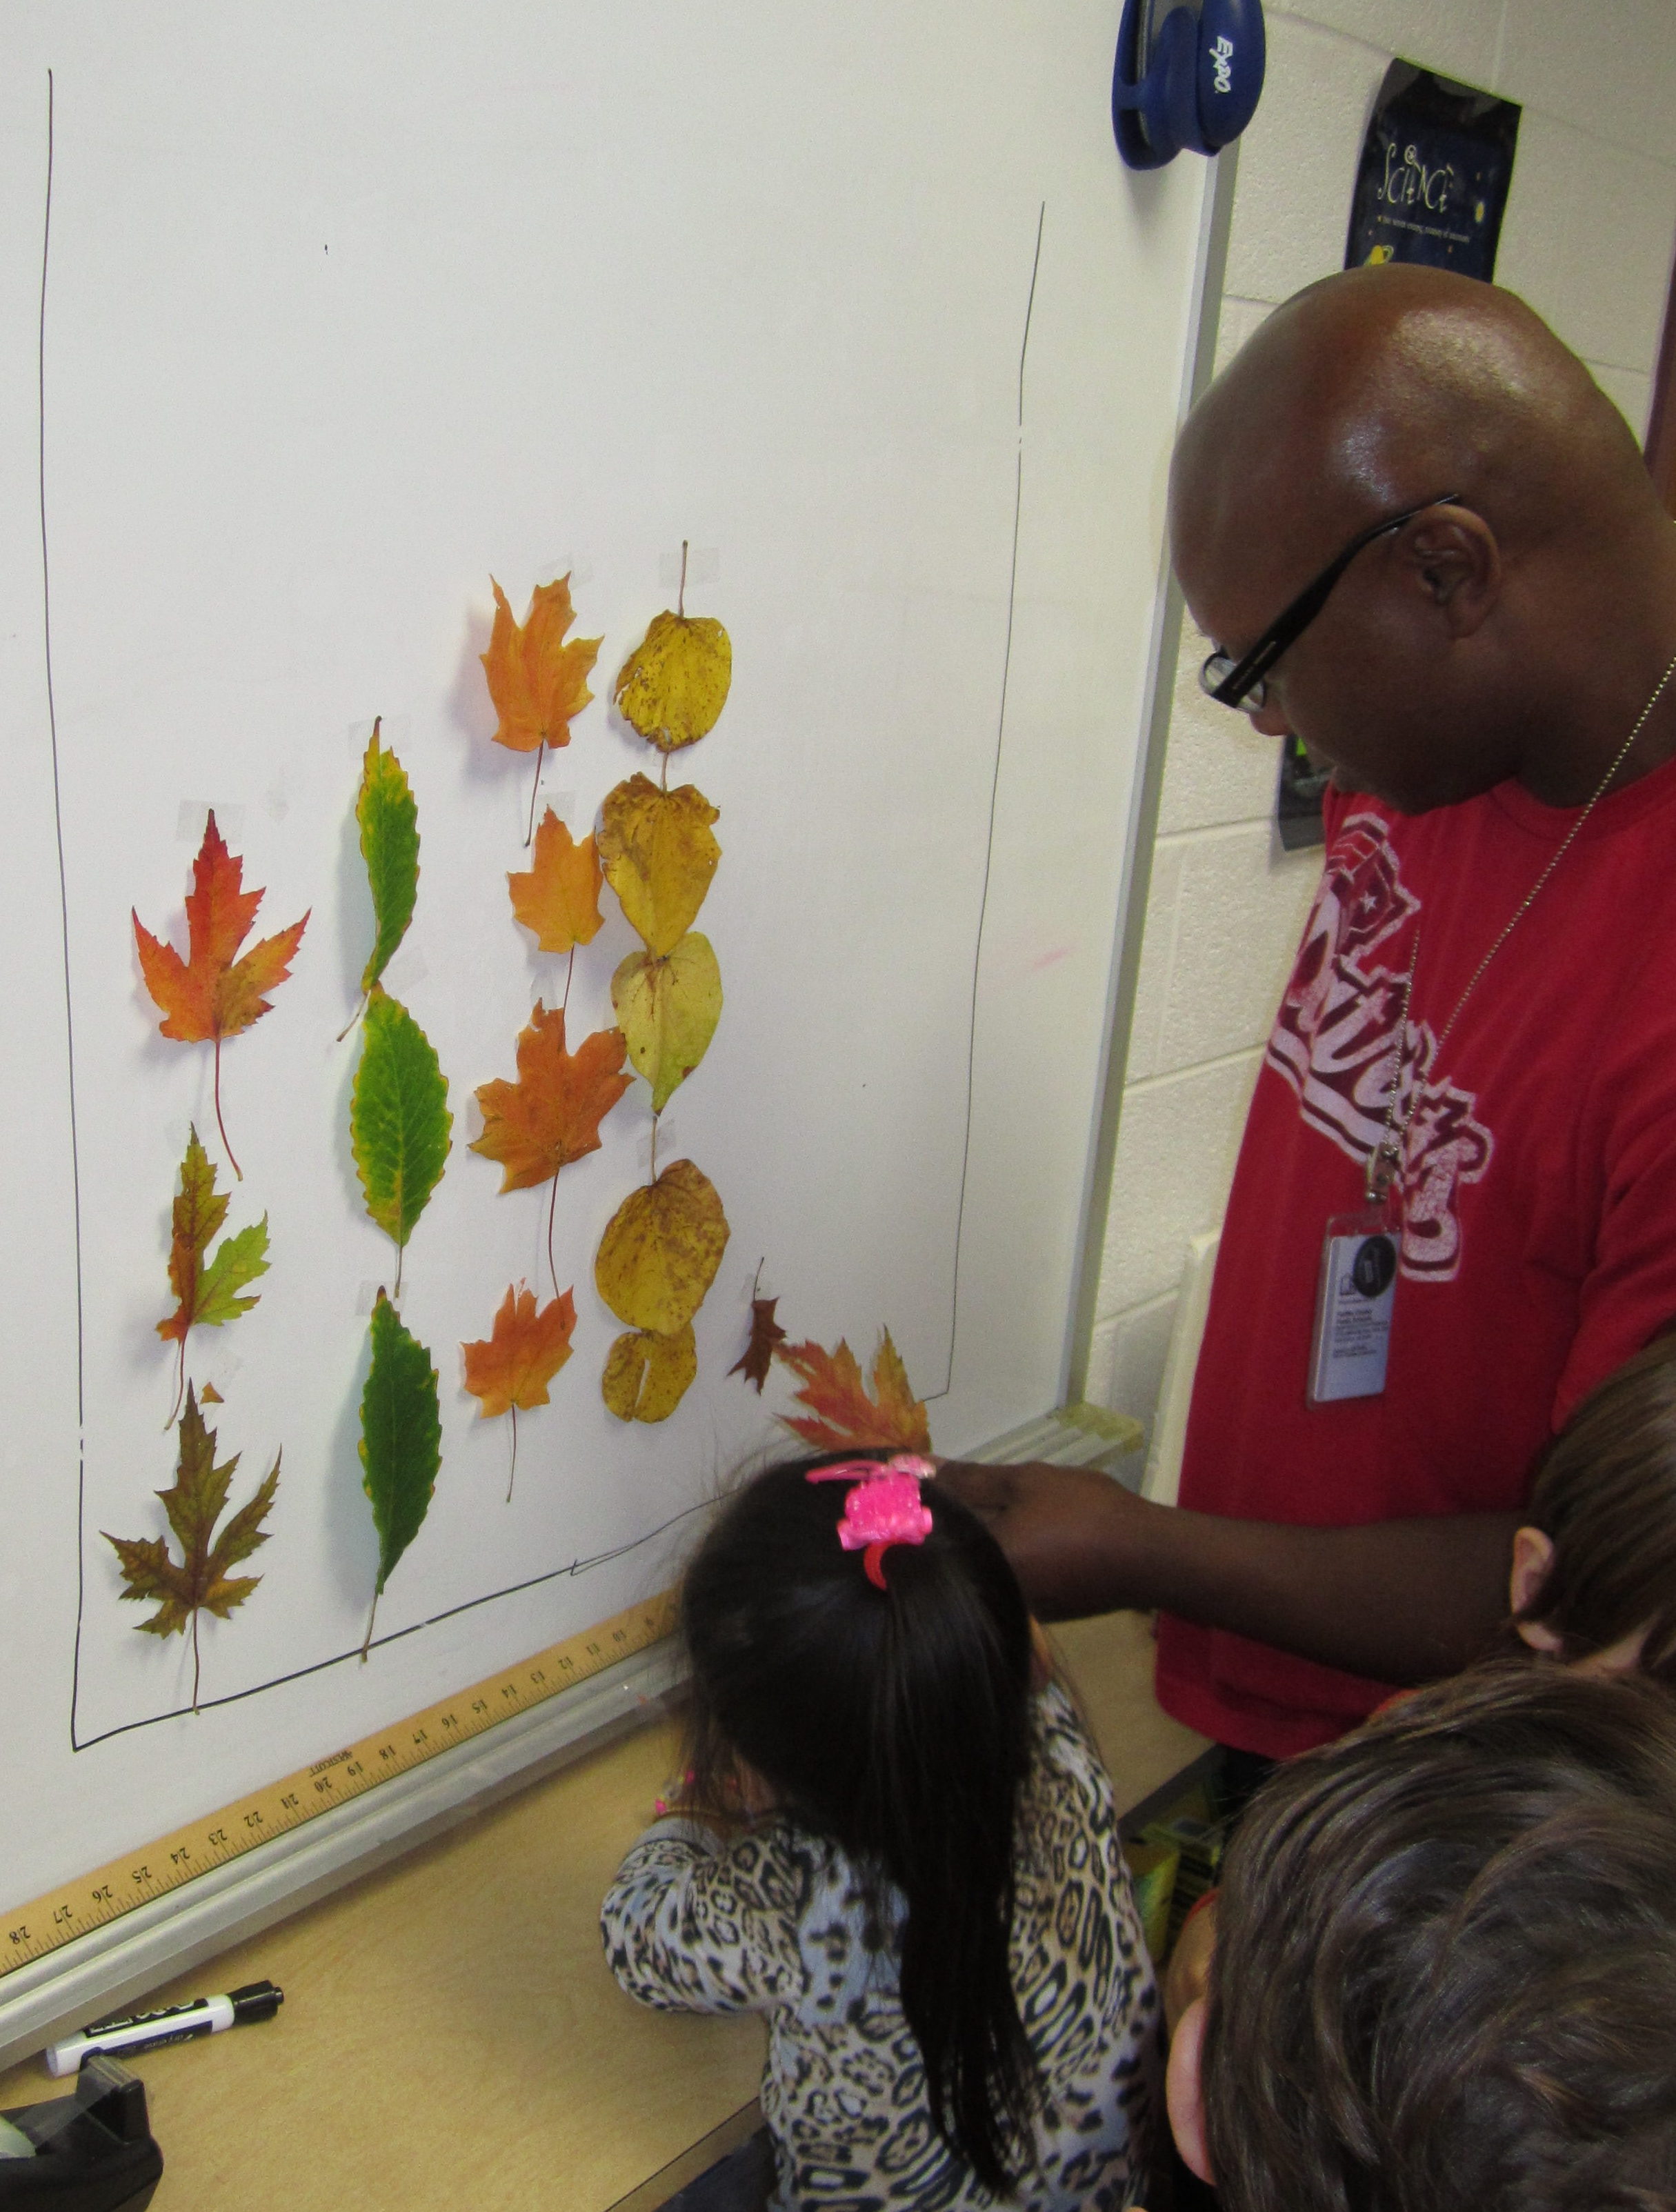 Child and teacher graphing leaves by shape